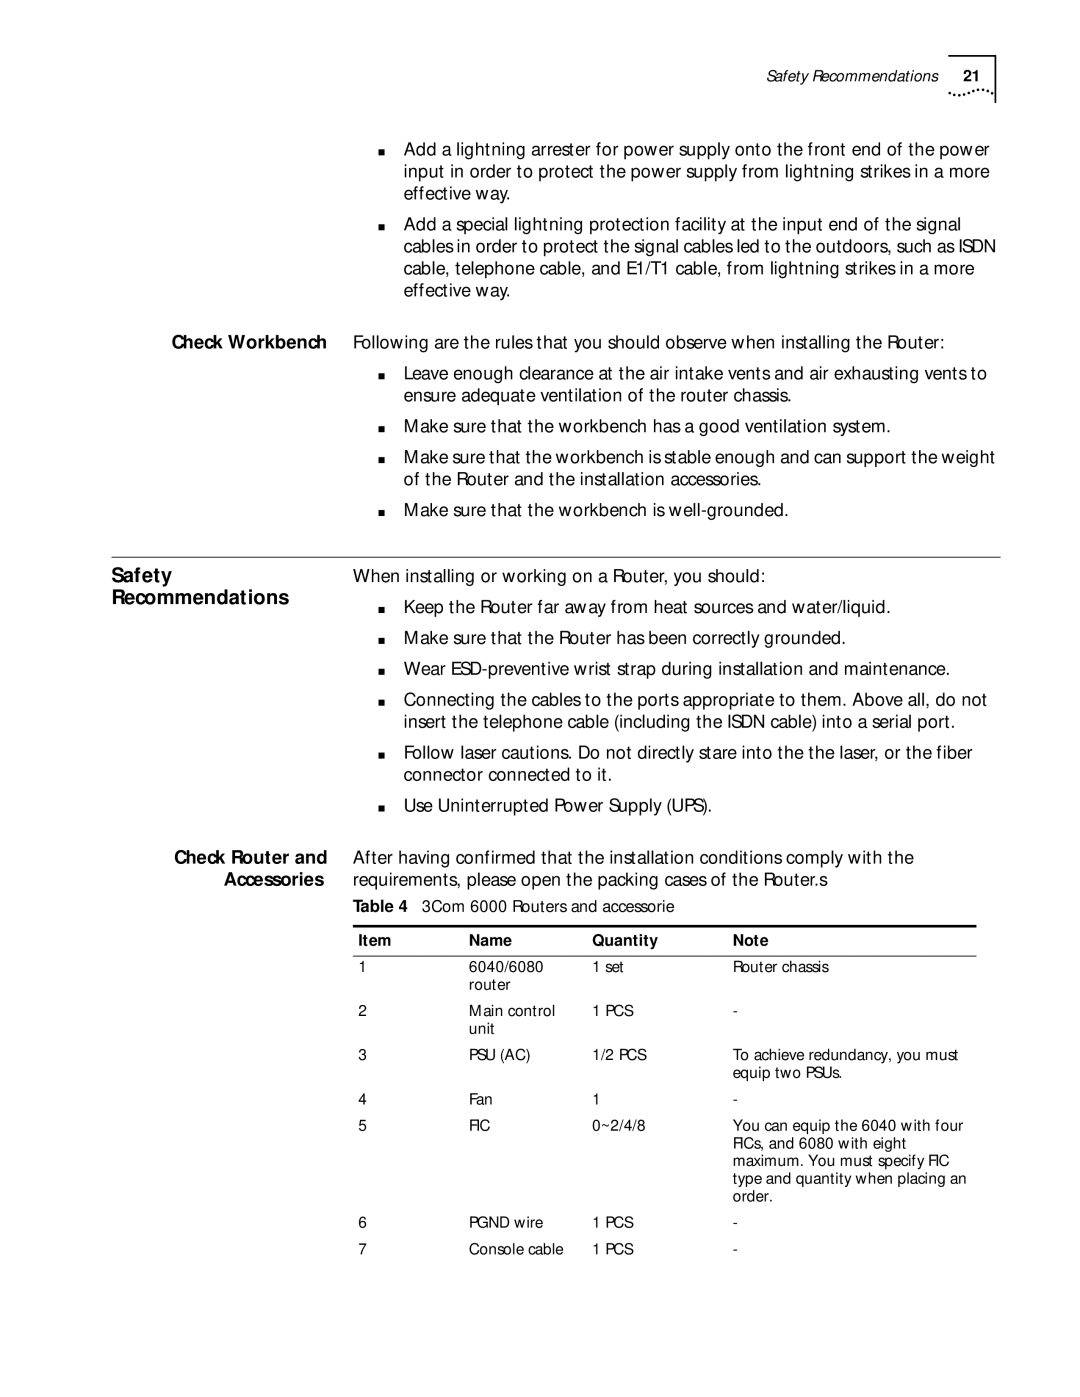 HP manual Safety Recommendations, Check Router Accessories, 3Com 6000 Routers and accessorie, Name Quantity 